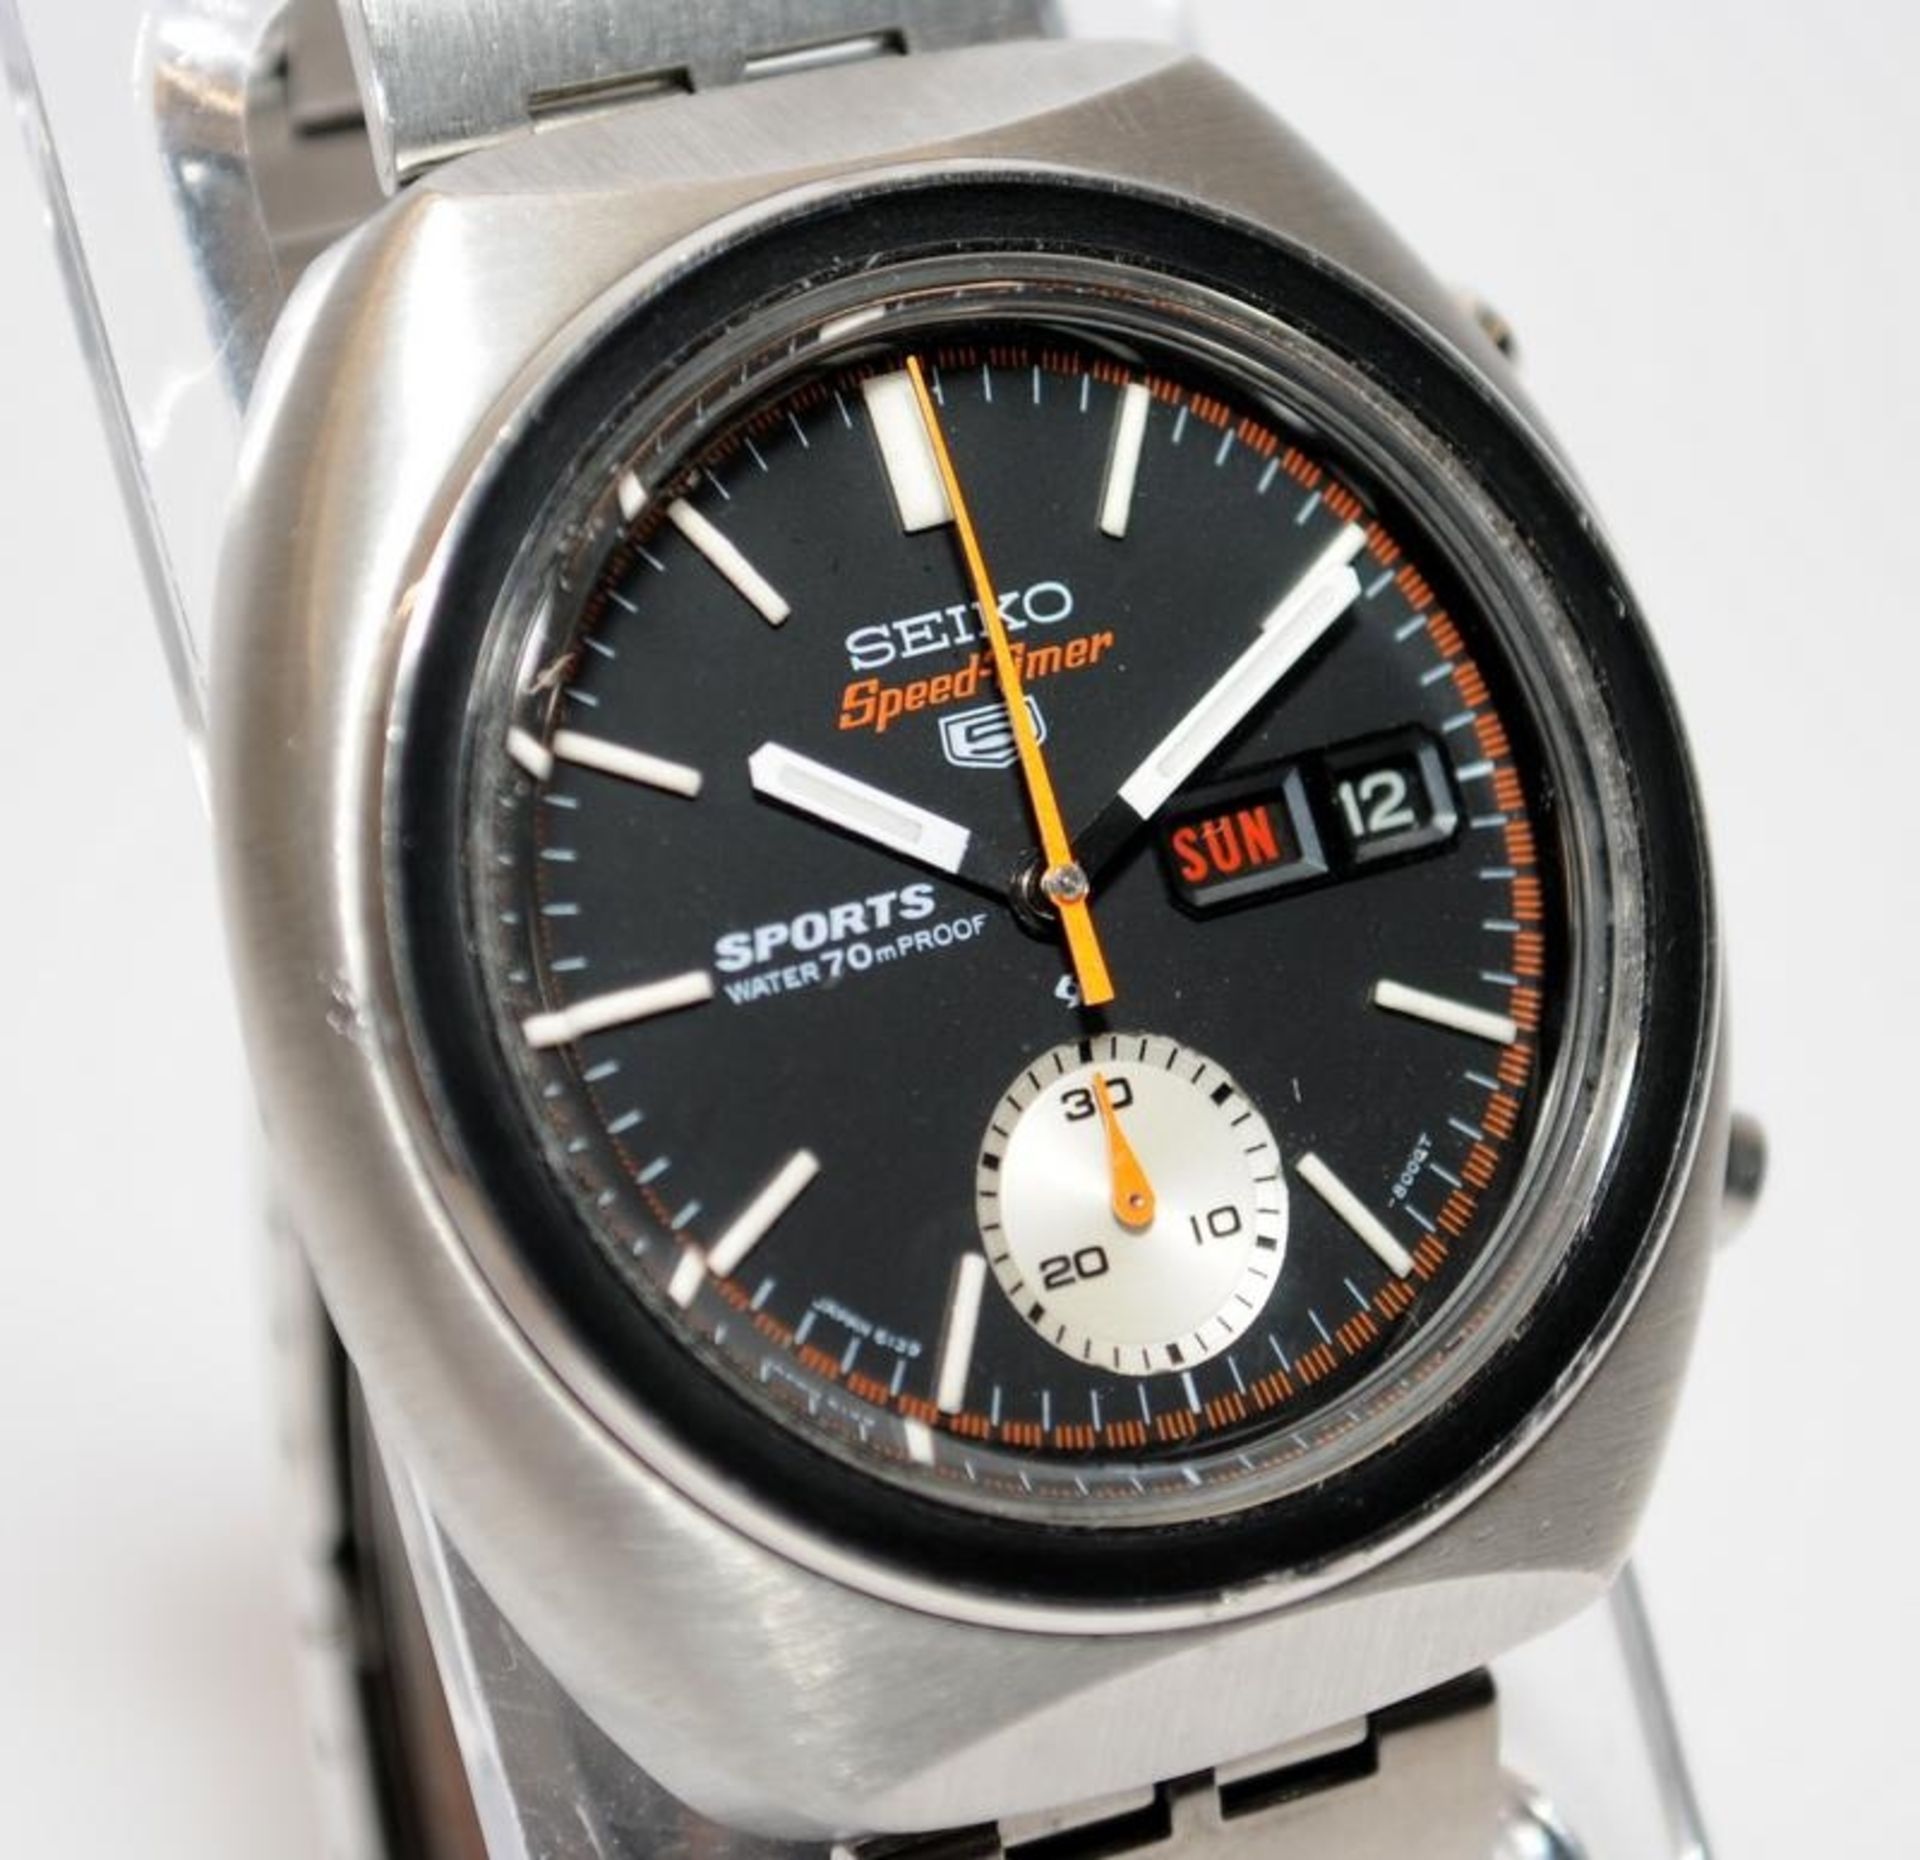 Vintage Seiko 5 Speed Timer gents automatic chronograph model ref 6139-8002, serial number dates - Image 2 of 4